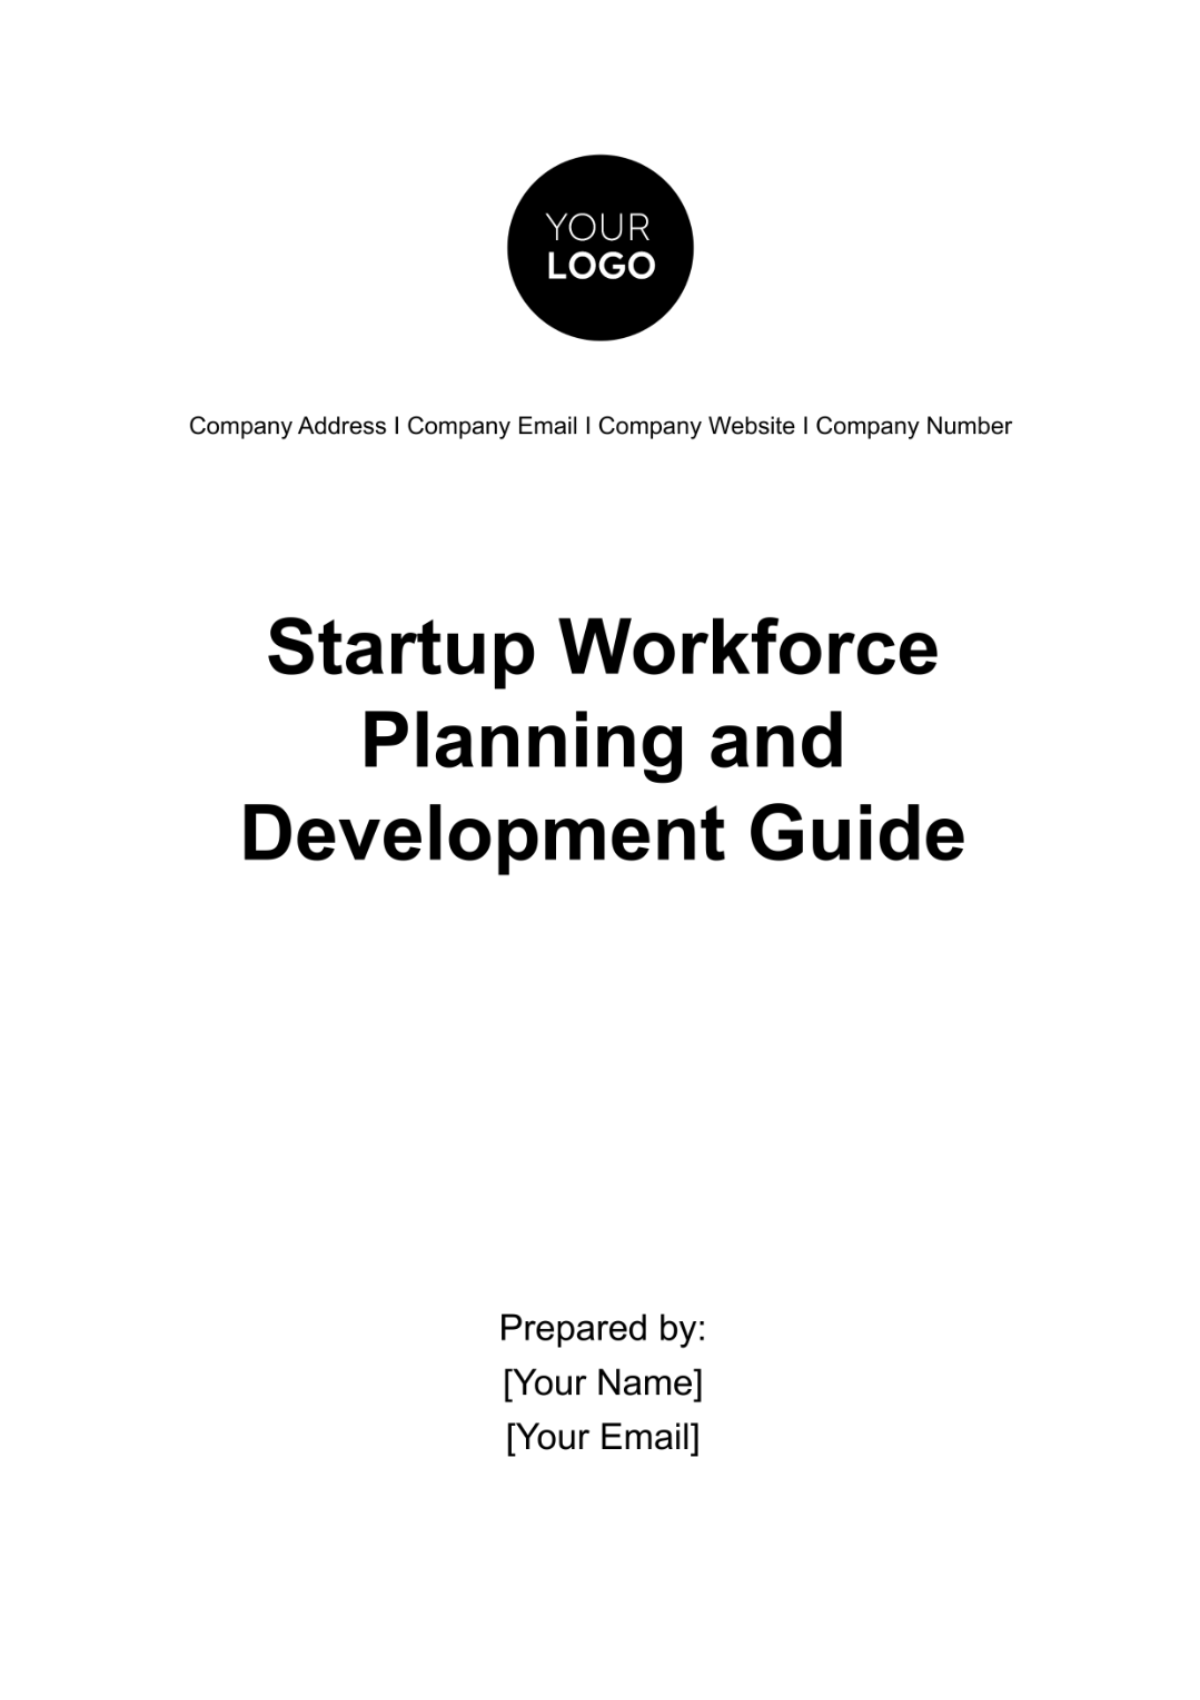 Startup Workforce Planning and Development Guide Template